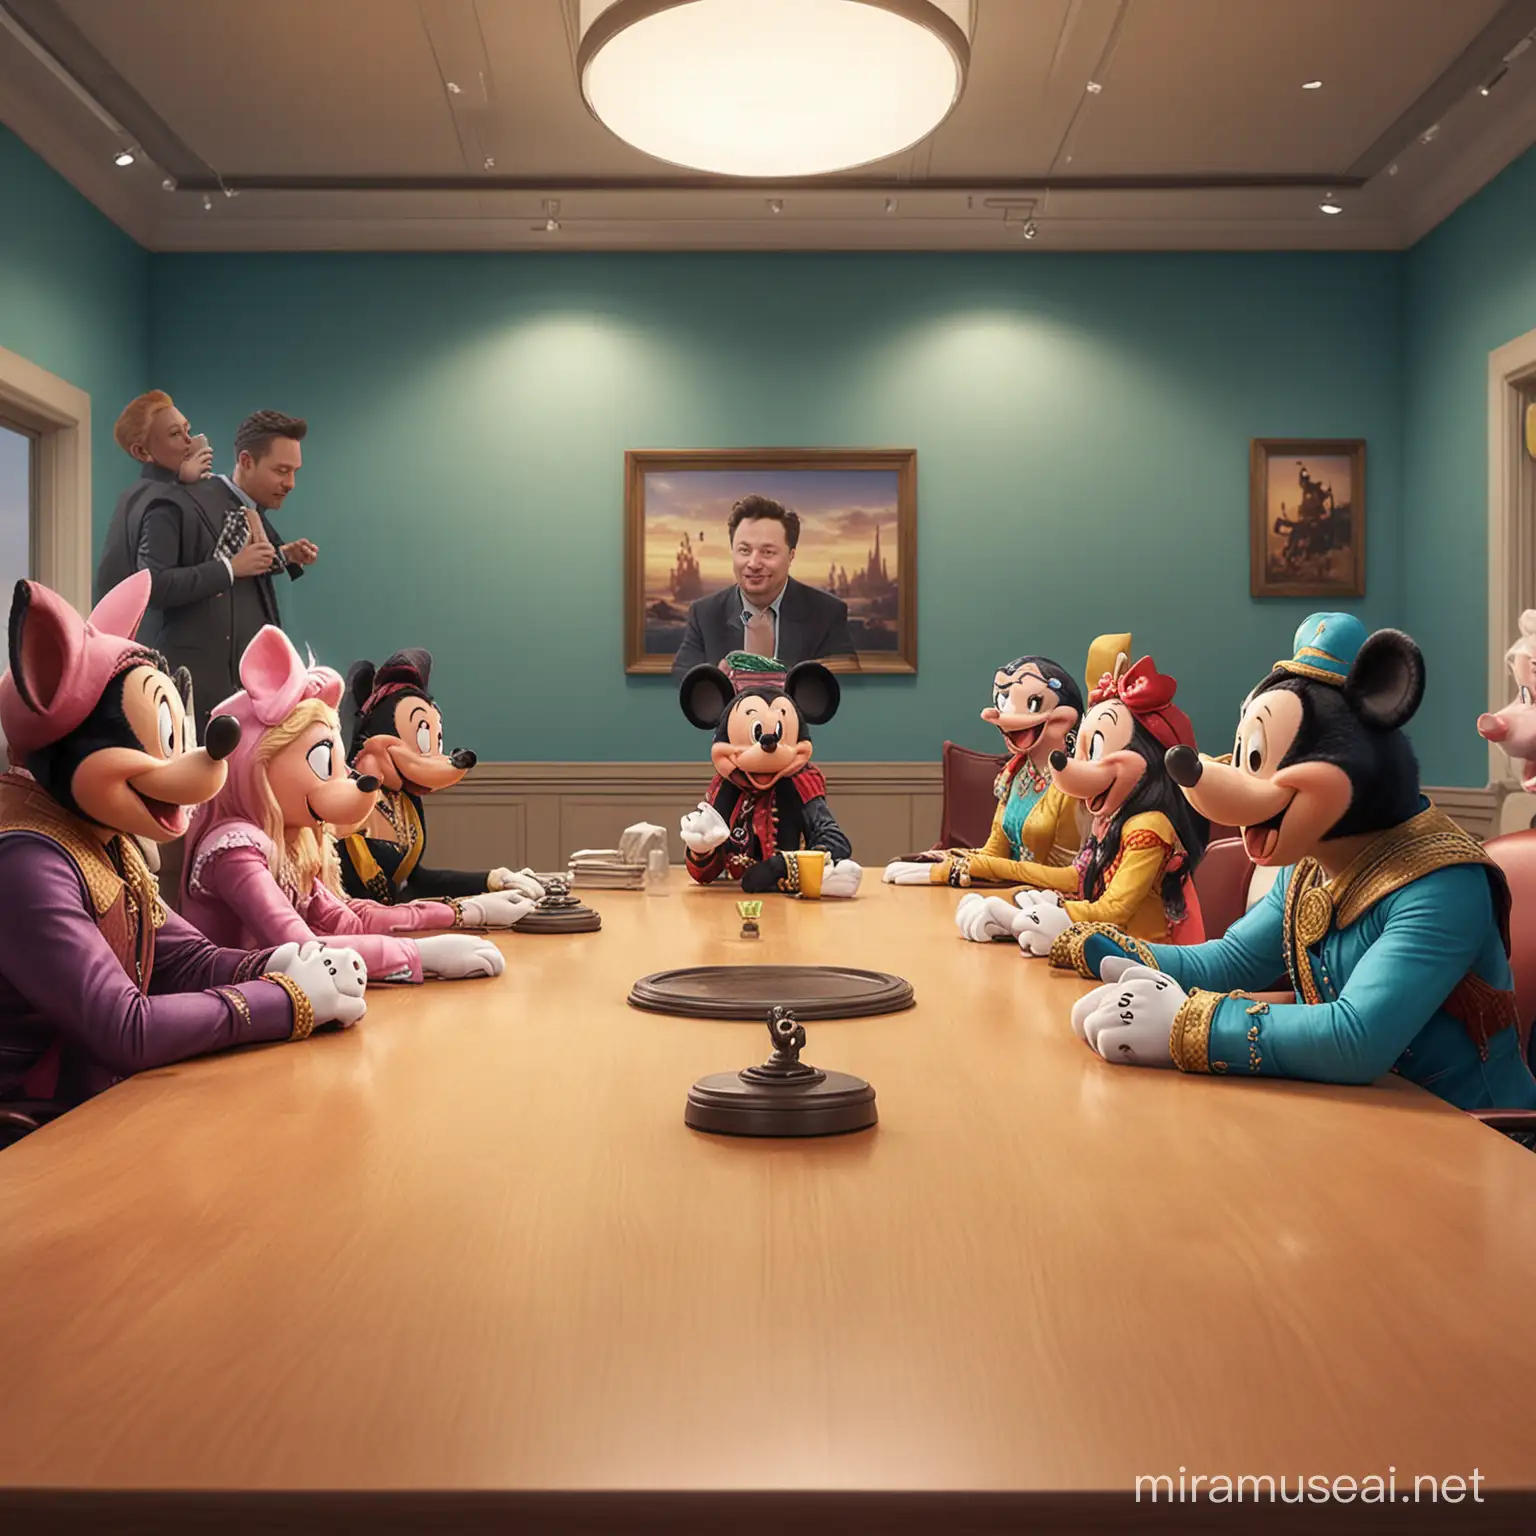 elon musk in a board room with mickey mouse, elsa, piglet, aladdin, goofy and ariel having a meeting, realistic, office, vibrant colors, ultra realistic, photo realistic